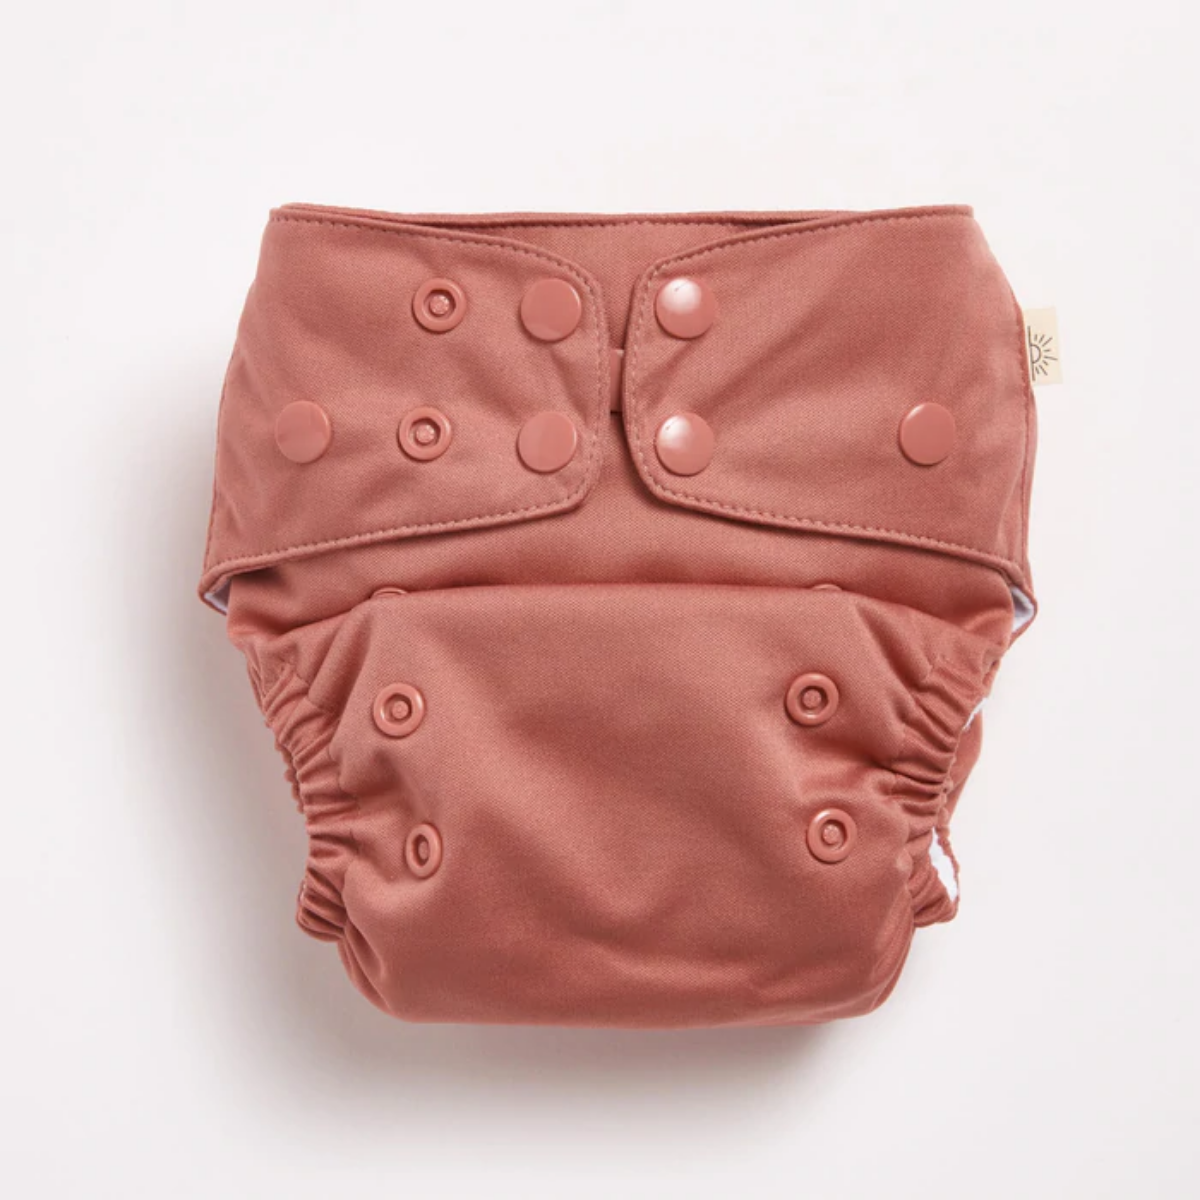 A Terracotta 2.0 Modern Cloth Nappy by EcoNaps on a white surface.